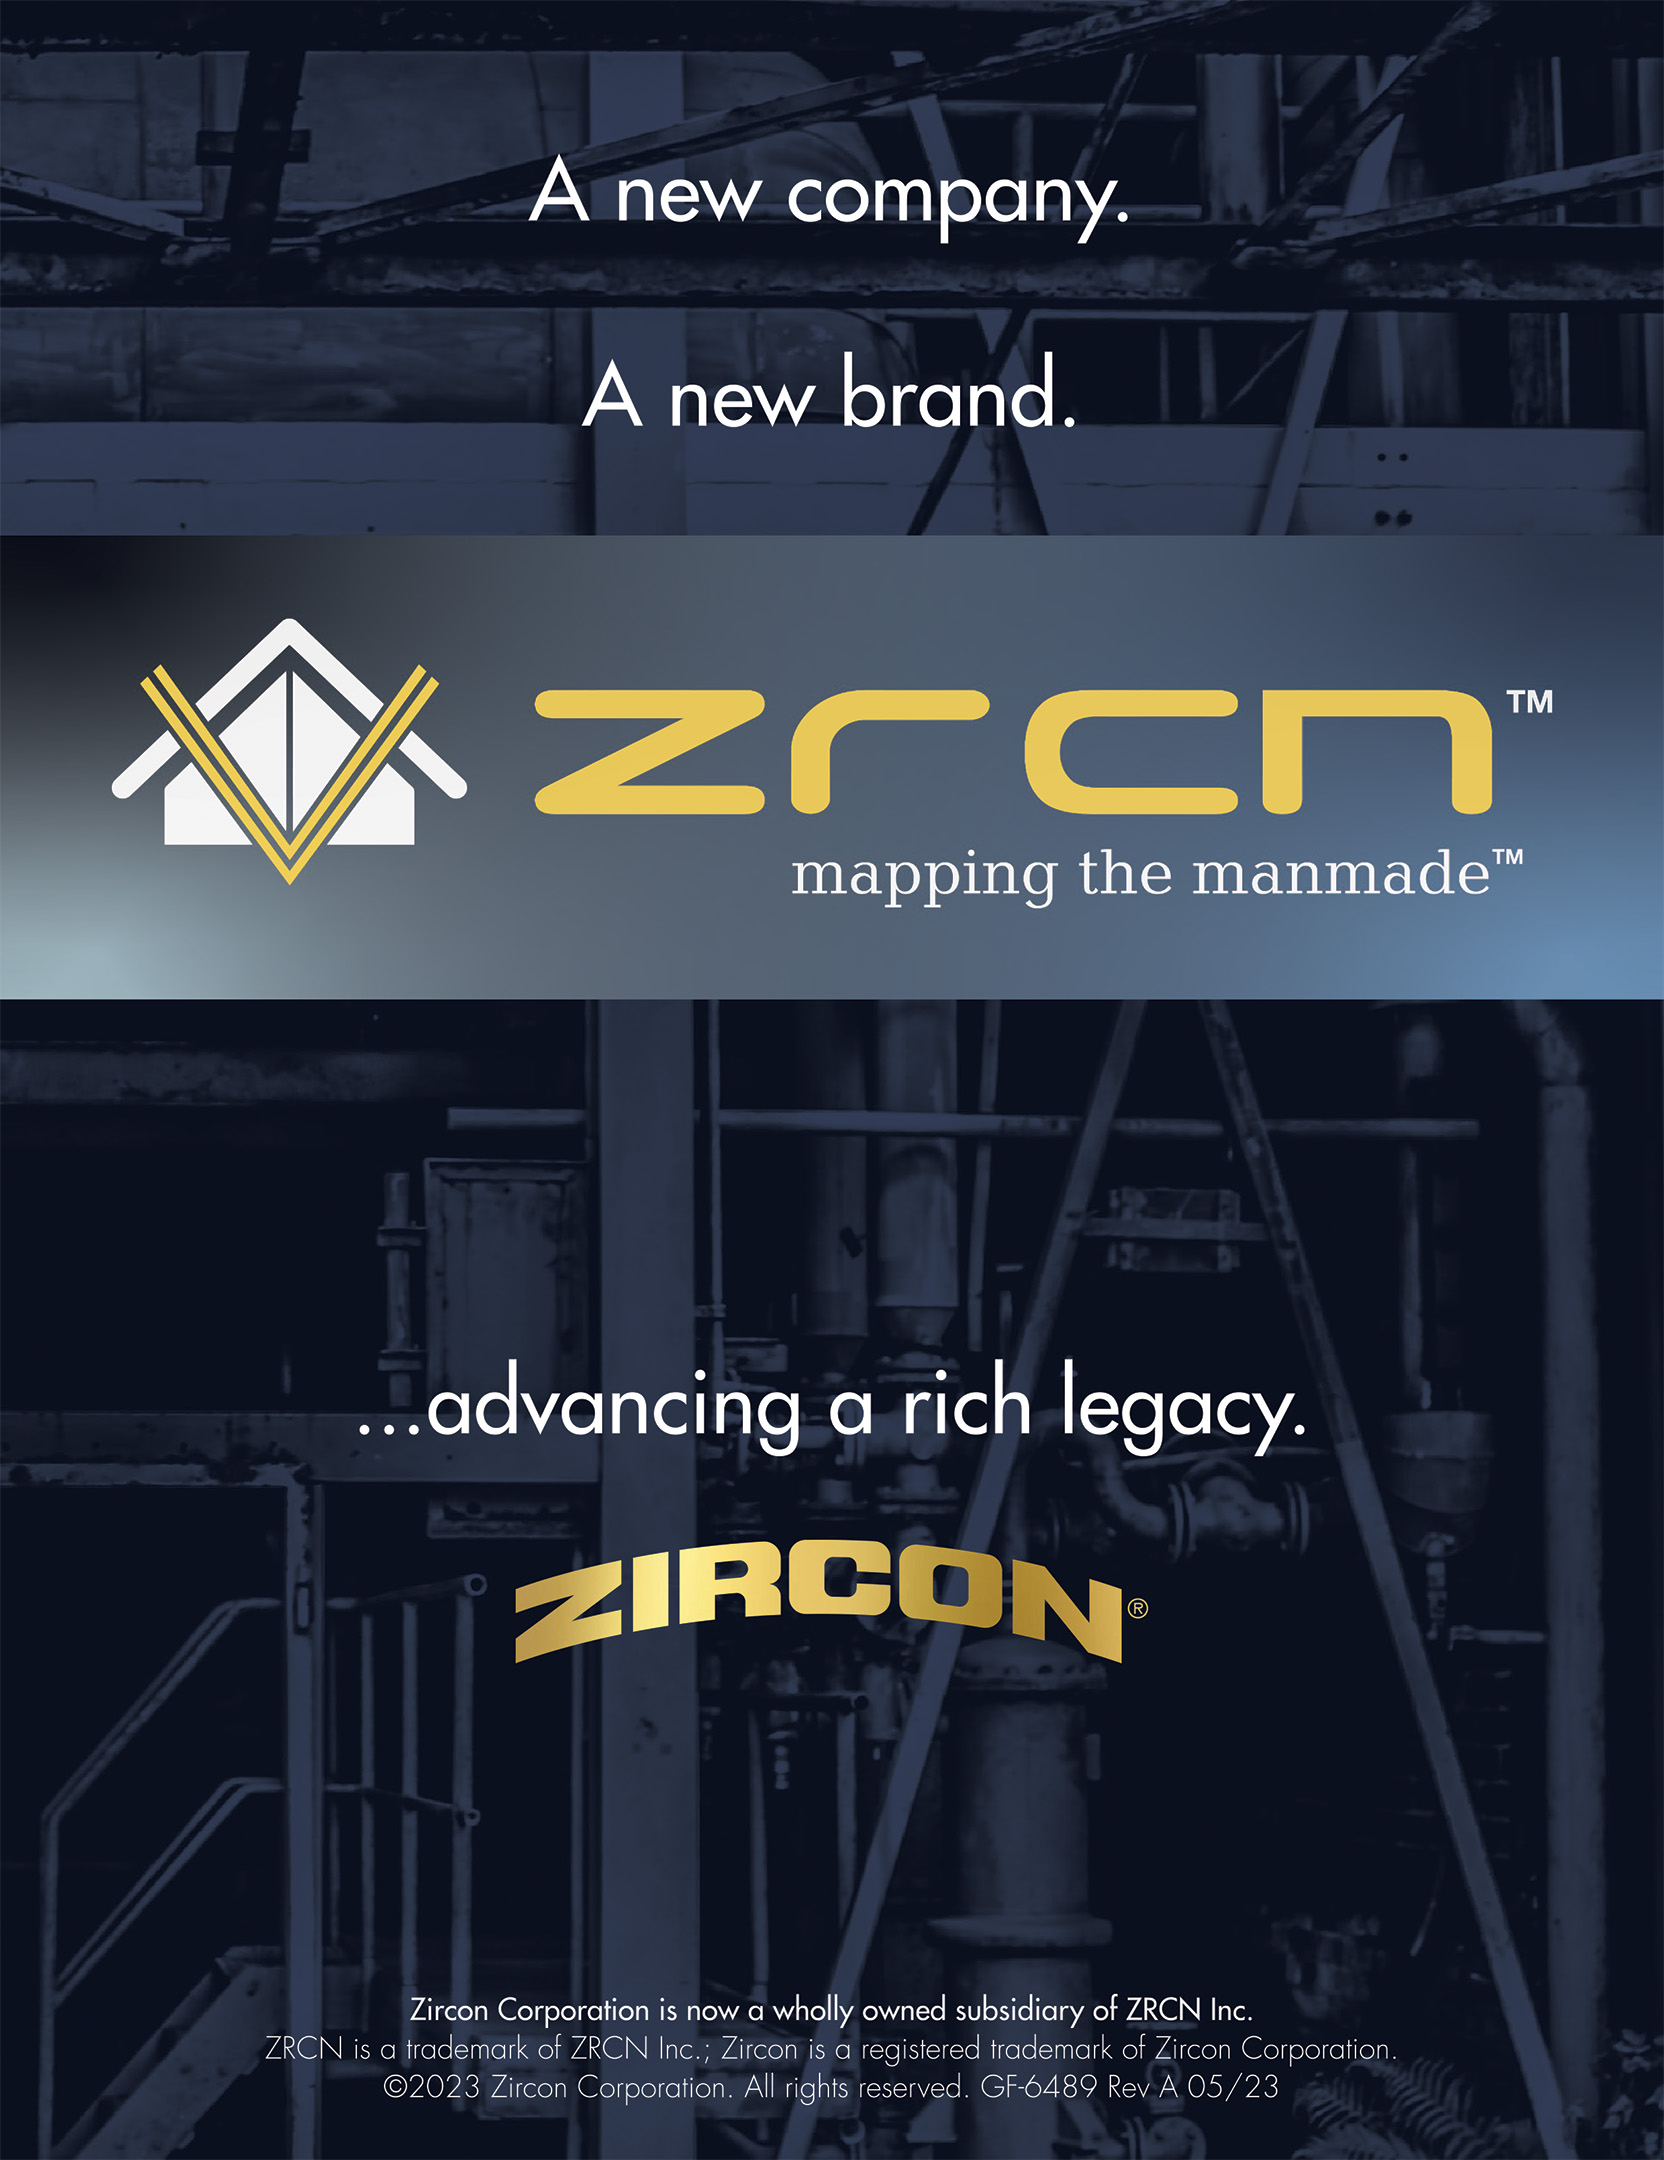 A new company. A new brand. ZRCN, mapping the manmade ...advancing a rich legacy. Zircon, a higher form of tools. Zircon Corporation is now a wholly owned subsidiary of ZRCN Inc.